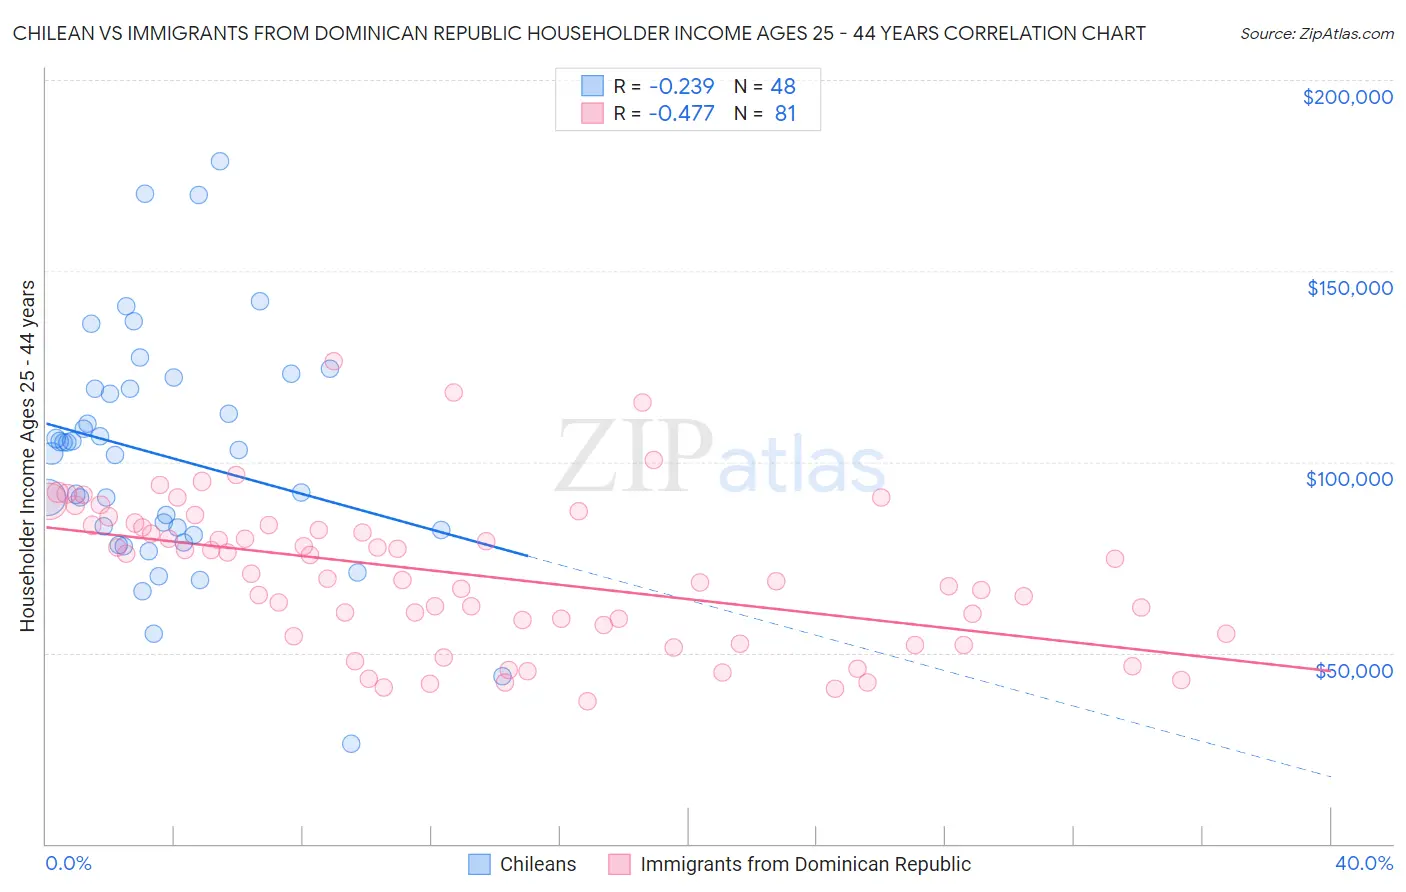 Chilean vs Immigrants from Dominican Republic Householder Income Ages 25 - 44 years